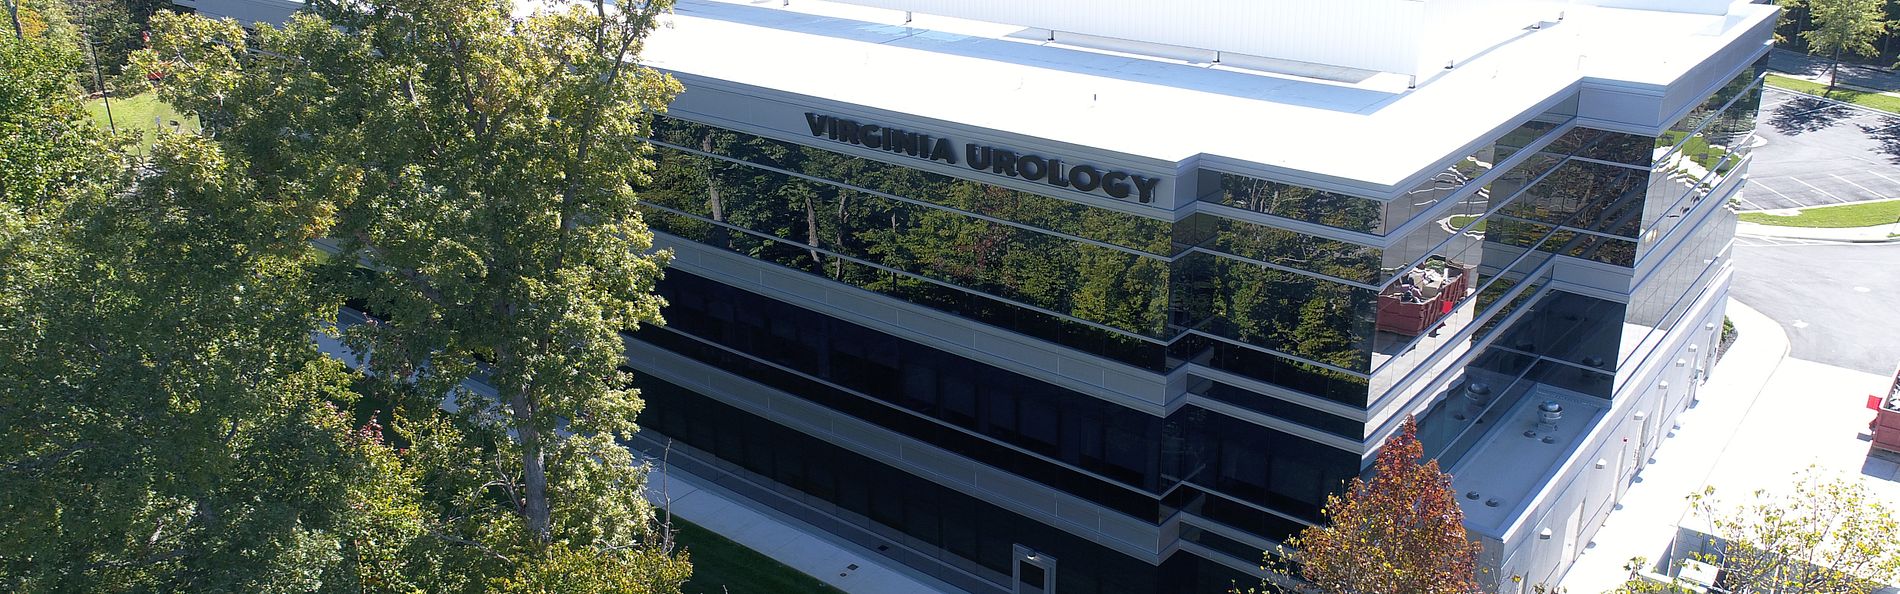 Side/upper view of the newly built Virginia Urology.